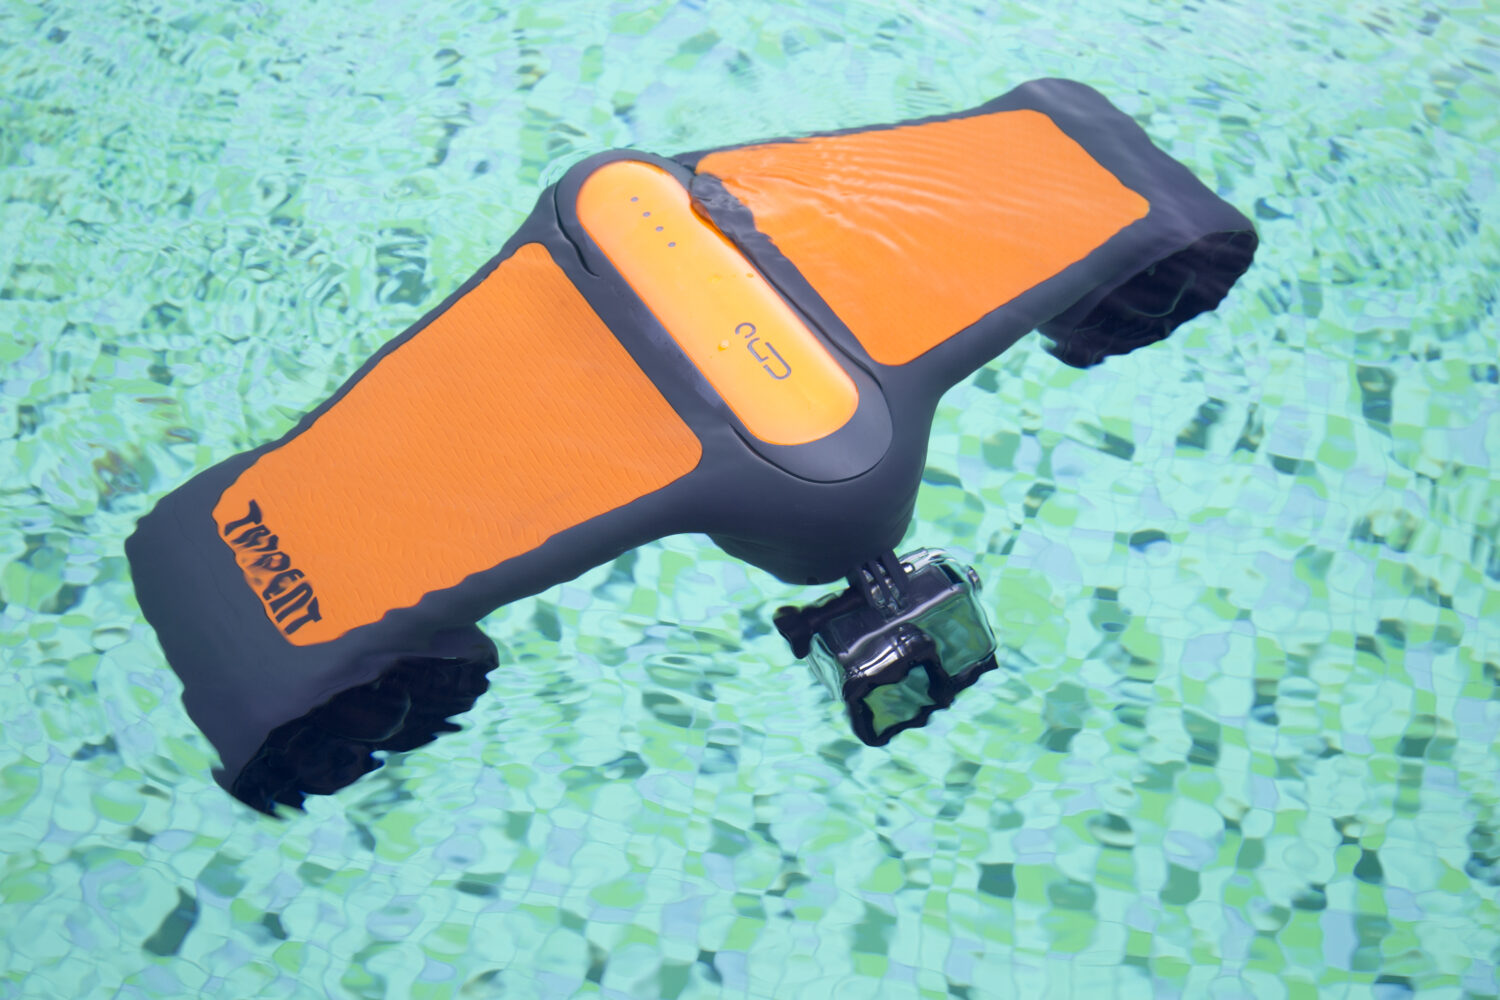 DiveDrive jet propelled underwater dive scooter - Geeky Gadgets